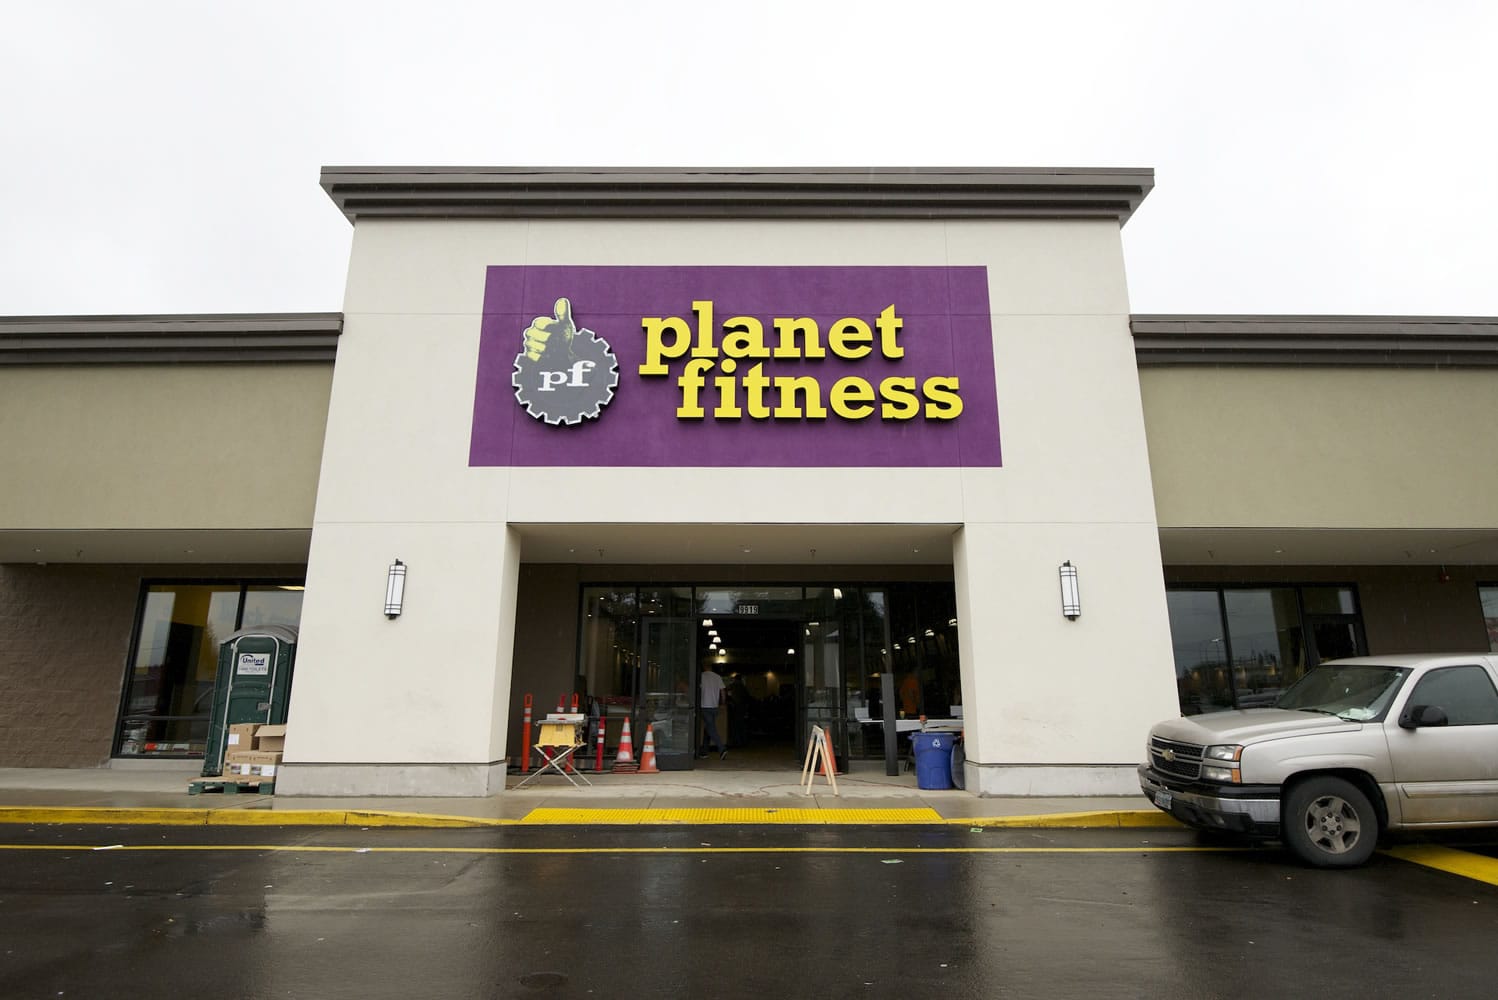 A new storefront facade beckons new customers to Vancouver's second Planet Fitness facility, a no-frills workout center that's set to open on Friday at 9919 N.E.